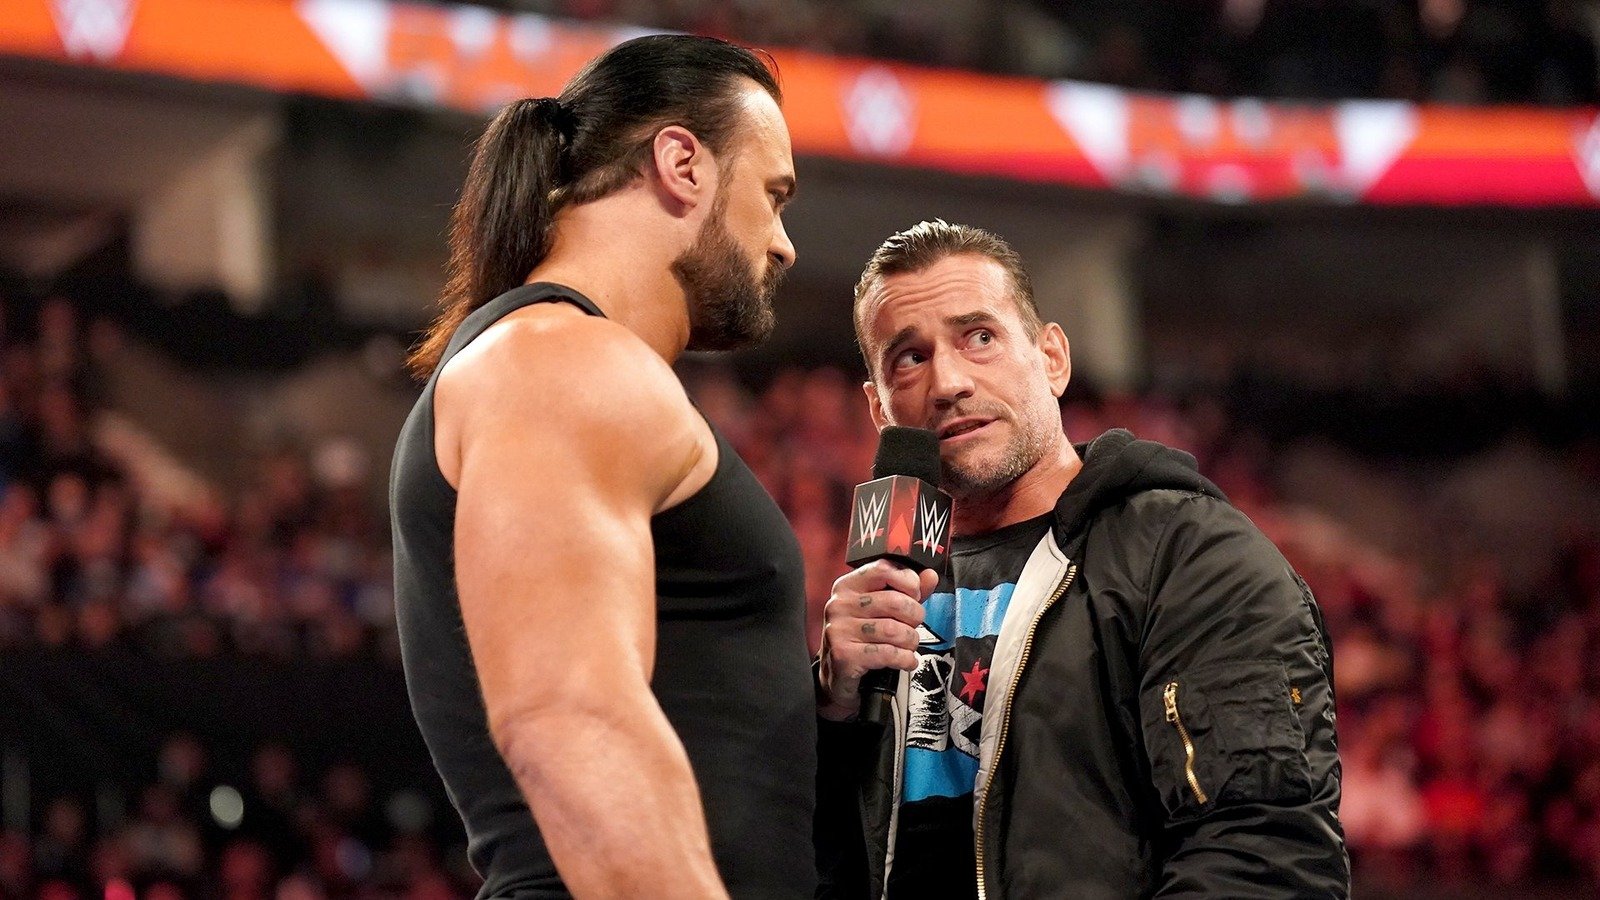 Drew McIntyre Mocks CM Punk with Insulting Remarks at WWE Live Events